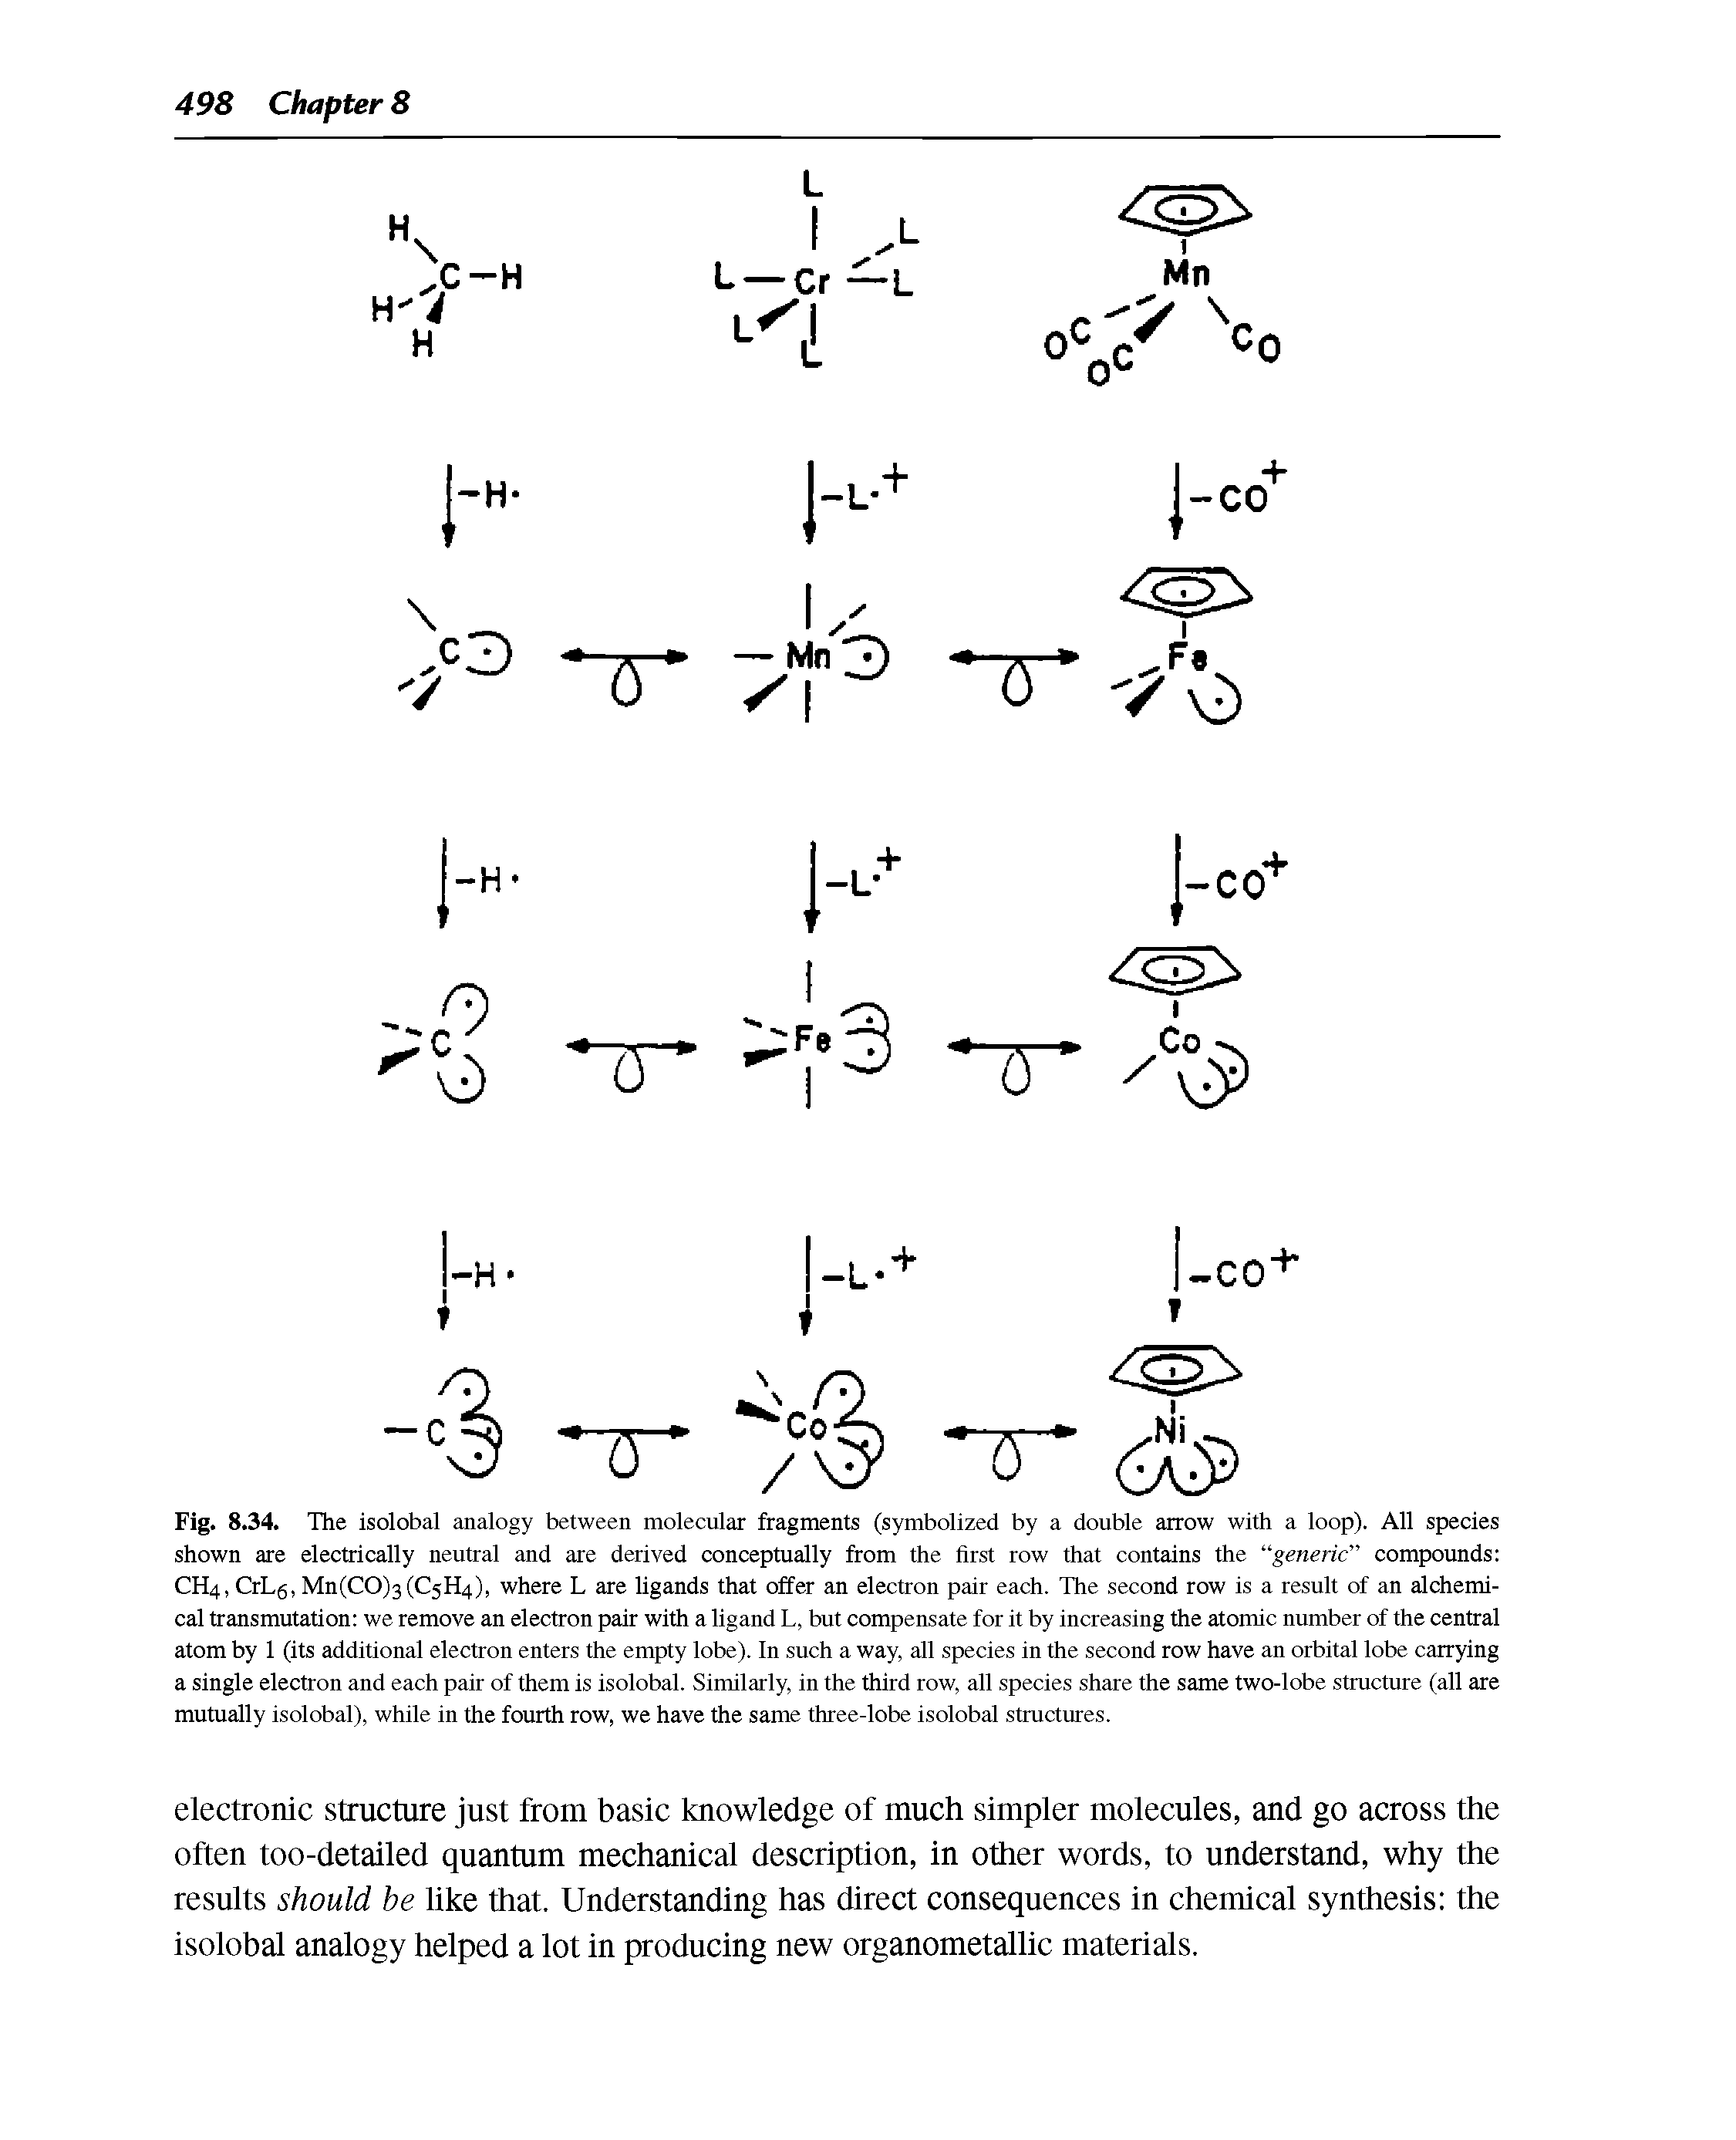 Fig. 8.34. The isolobal analogy between molecular fragments (symbolized by a double arrow with a loop). All species shown are electrically neutral and are derived conceptually from the first row that contains the generic" compounds CH4, CrLg, Mn(CO)3(C5H4), where L are ligands that offer an electron pair each. The second row is a result of an alchemical transmutation we remove an electron pair with a ligand L, but compensate for it by increasing the atomic number of the central atom by 1 (its additional electron enters the empty lobe). In such a way, all species in the second row have an orbital lobe carrying a single electron and each pair of them is isolobal. Similarly, in the third row, all species share the same two-lobe structure (all are mutually isolobal), while in the fourth row, we have the same three-lobe isolobal structures.